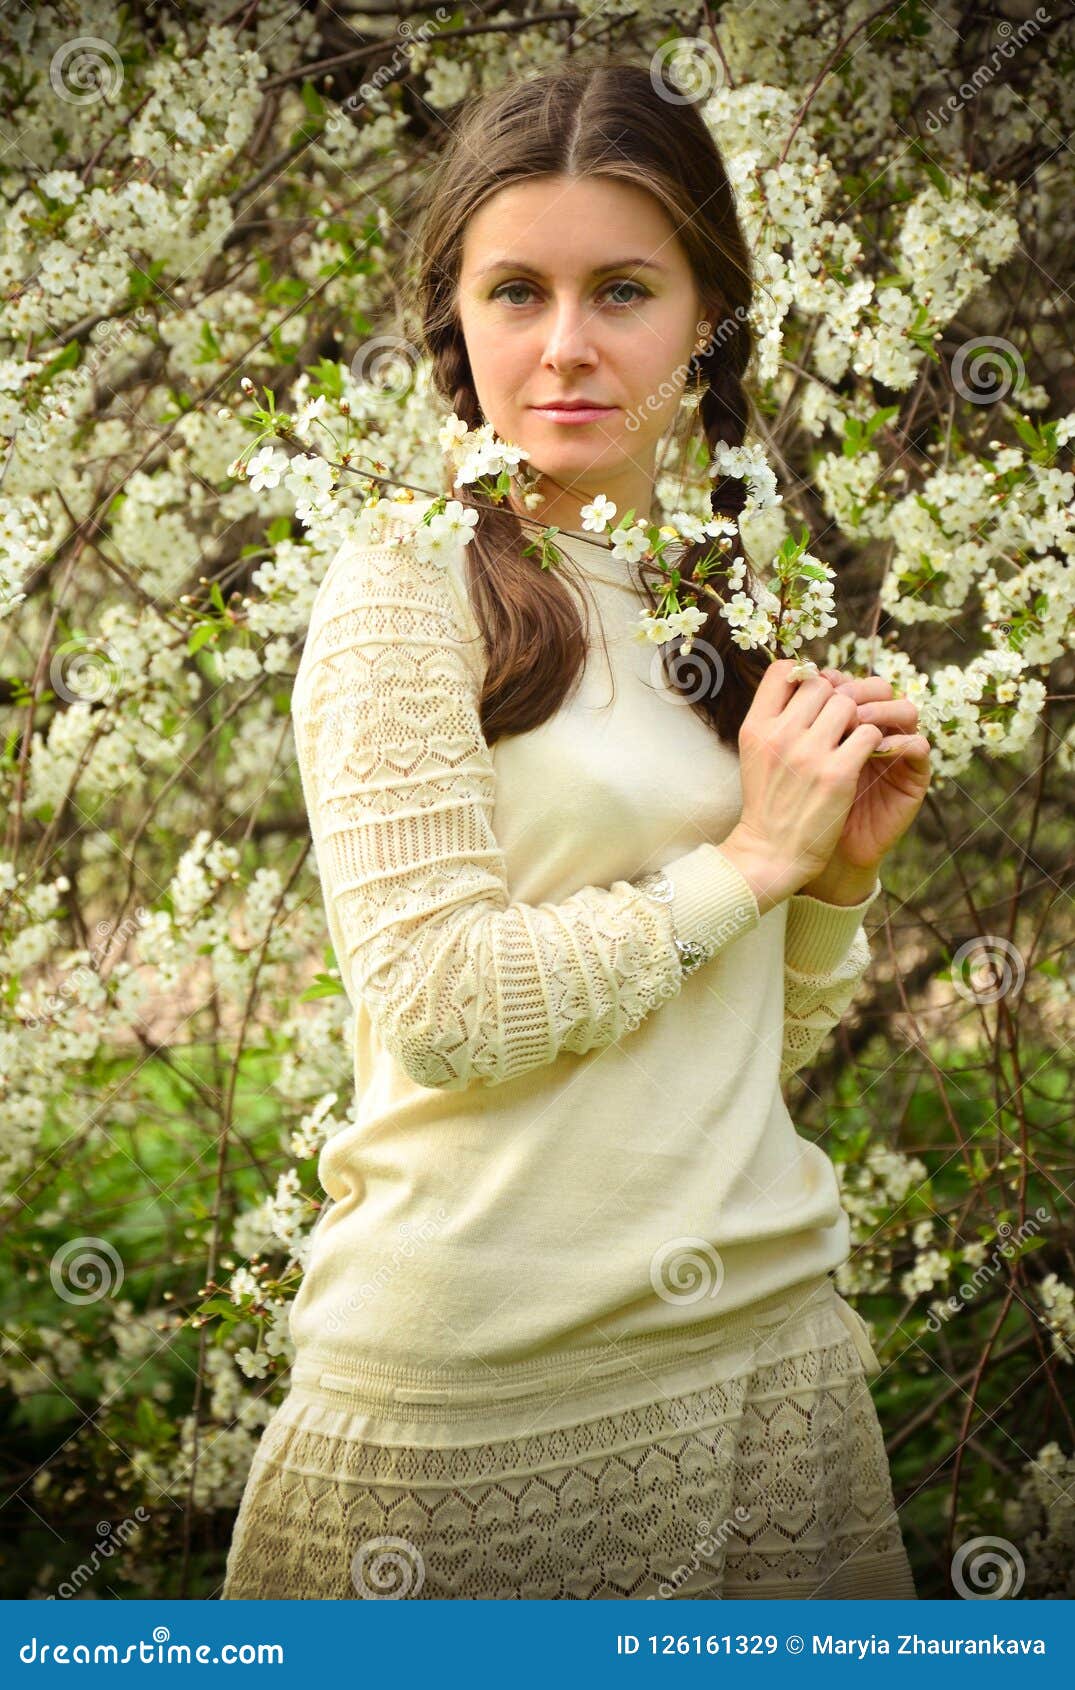 The Romantic Portrait of the Girl in the Blooming Cherry Trees. Stock ...